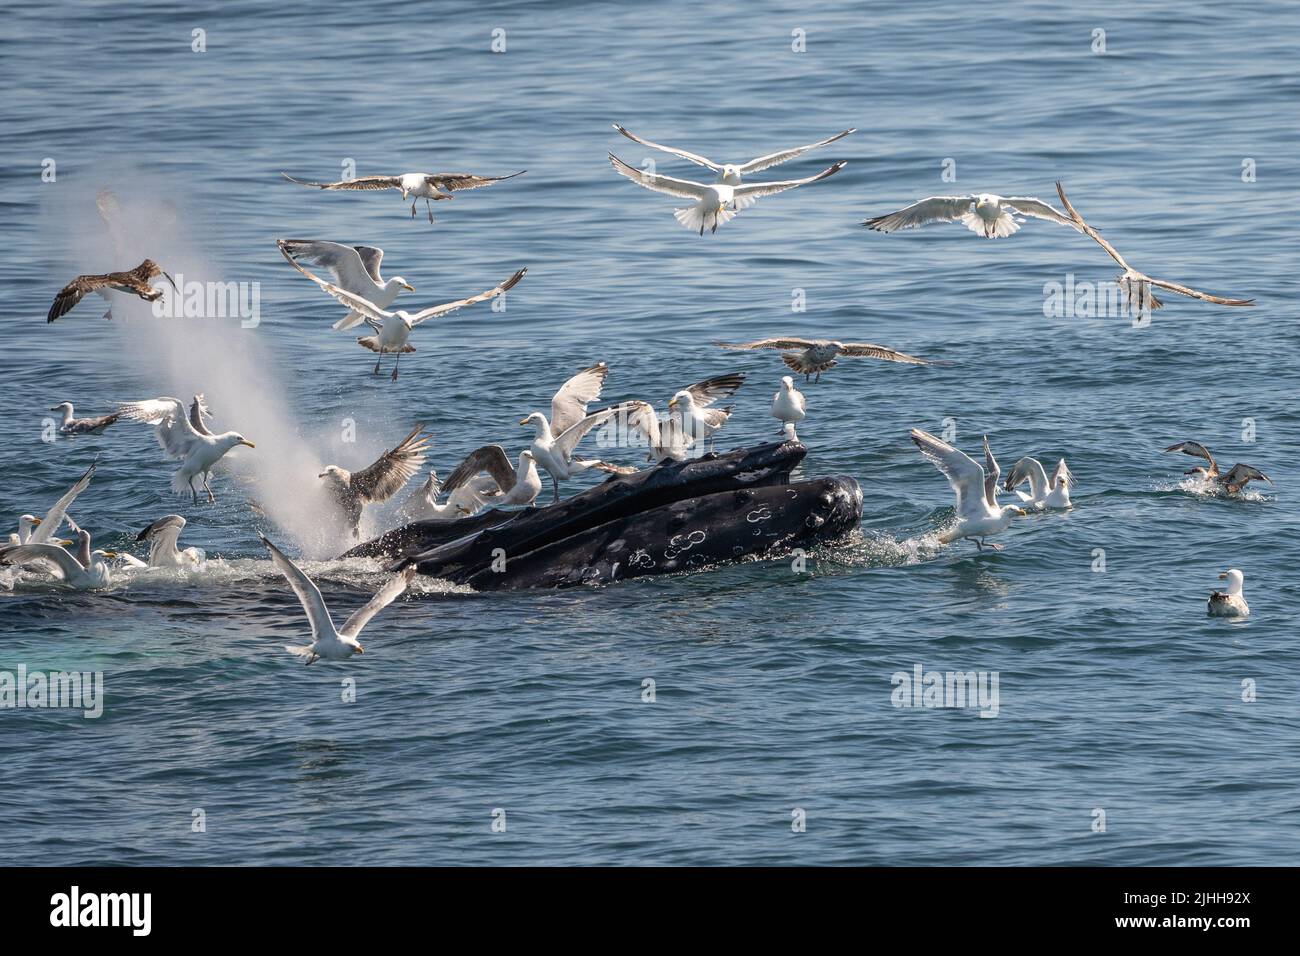 Humpback whales (Megaptera novaeangliae) bubble-net feeds near whale watching boat off the coast of Cape Cod Stock Photo